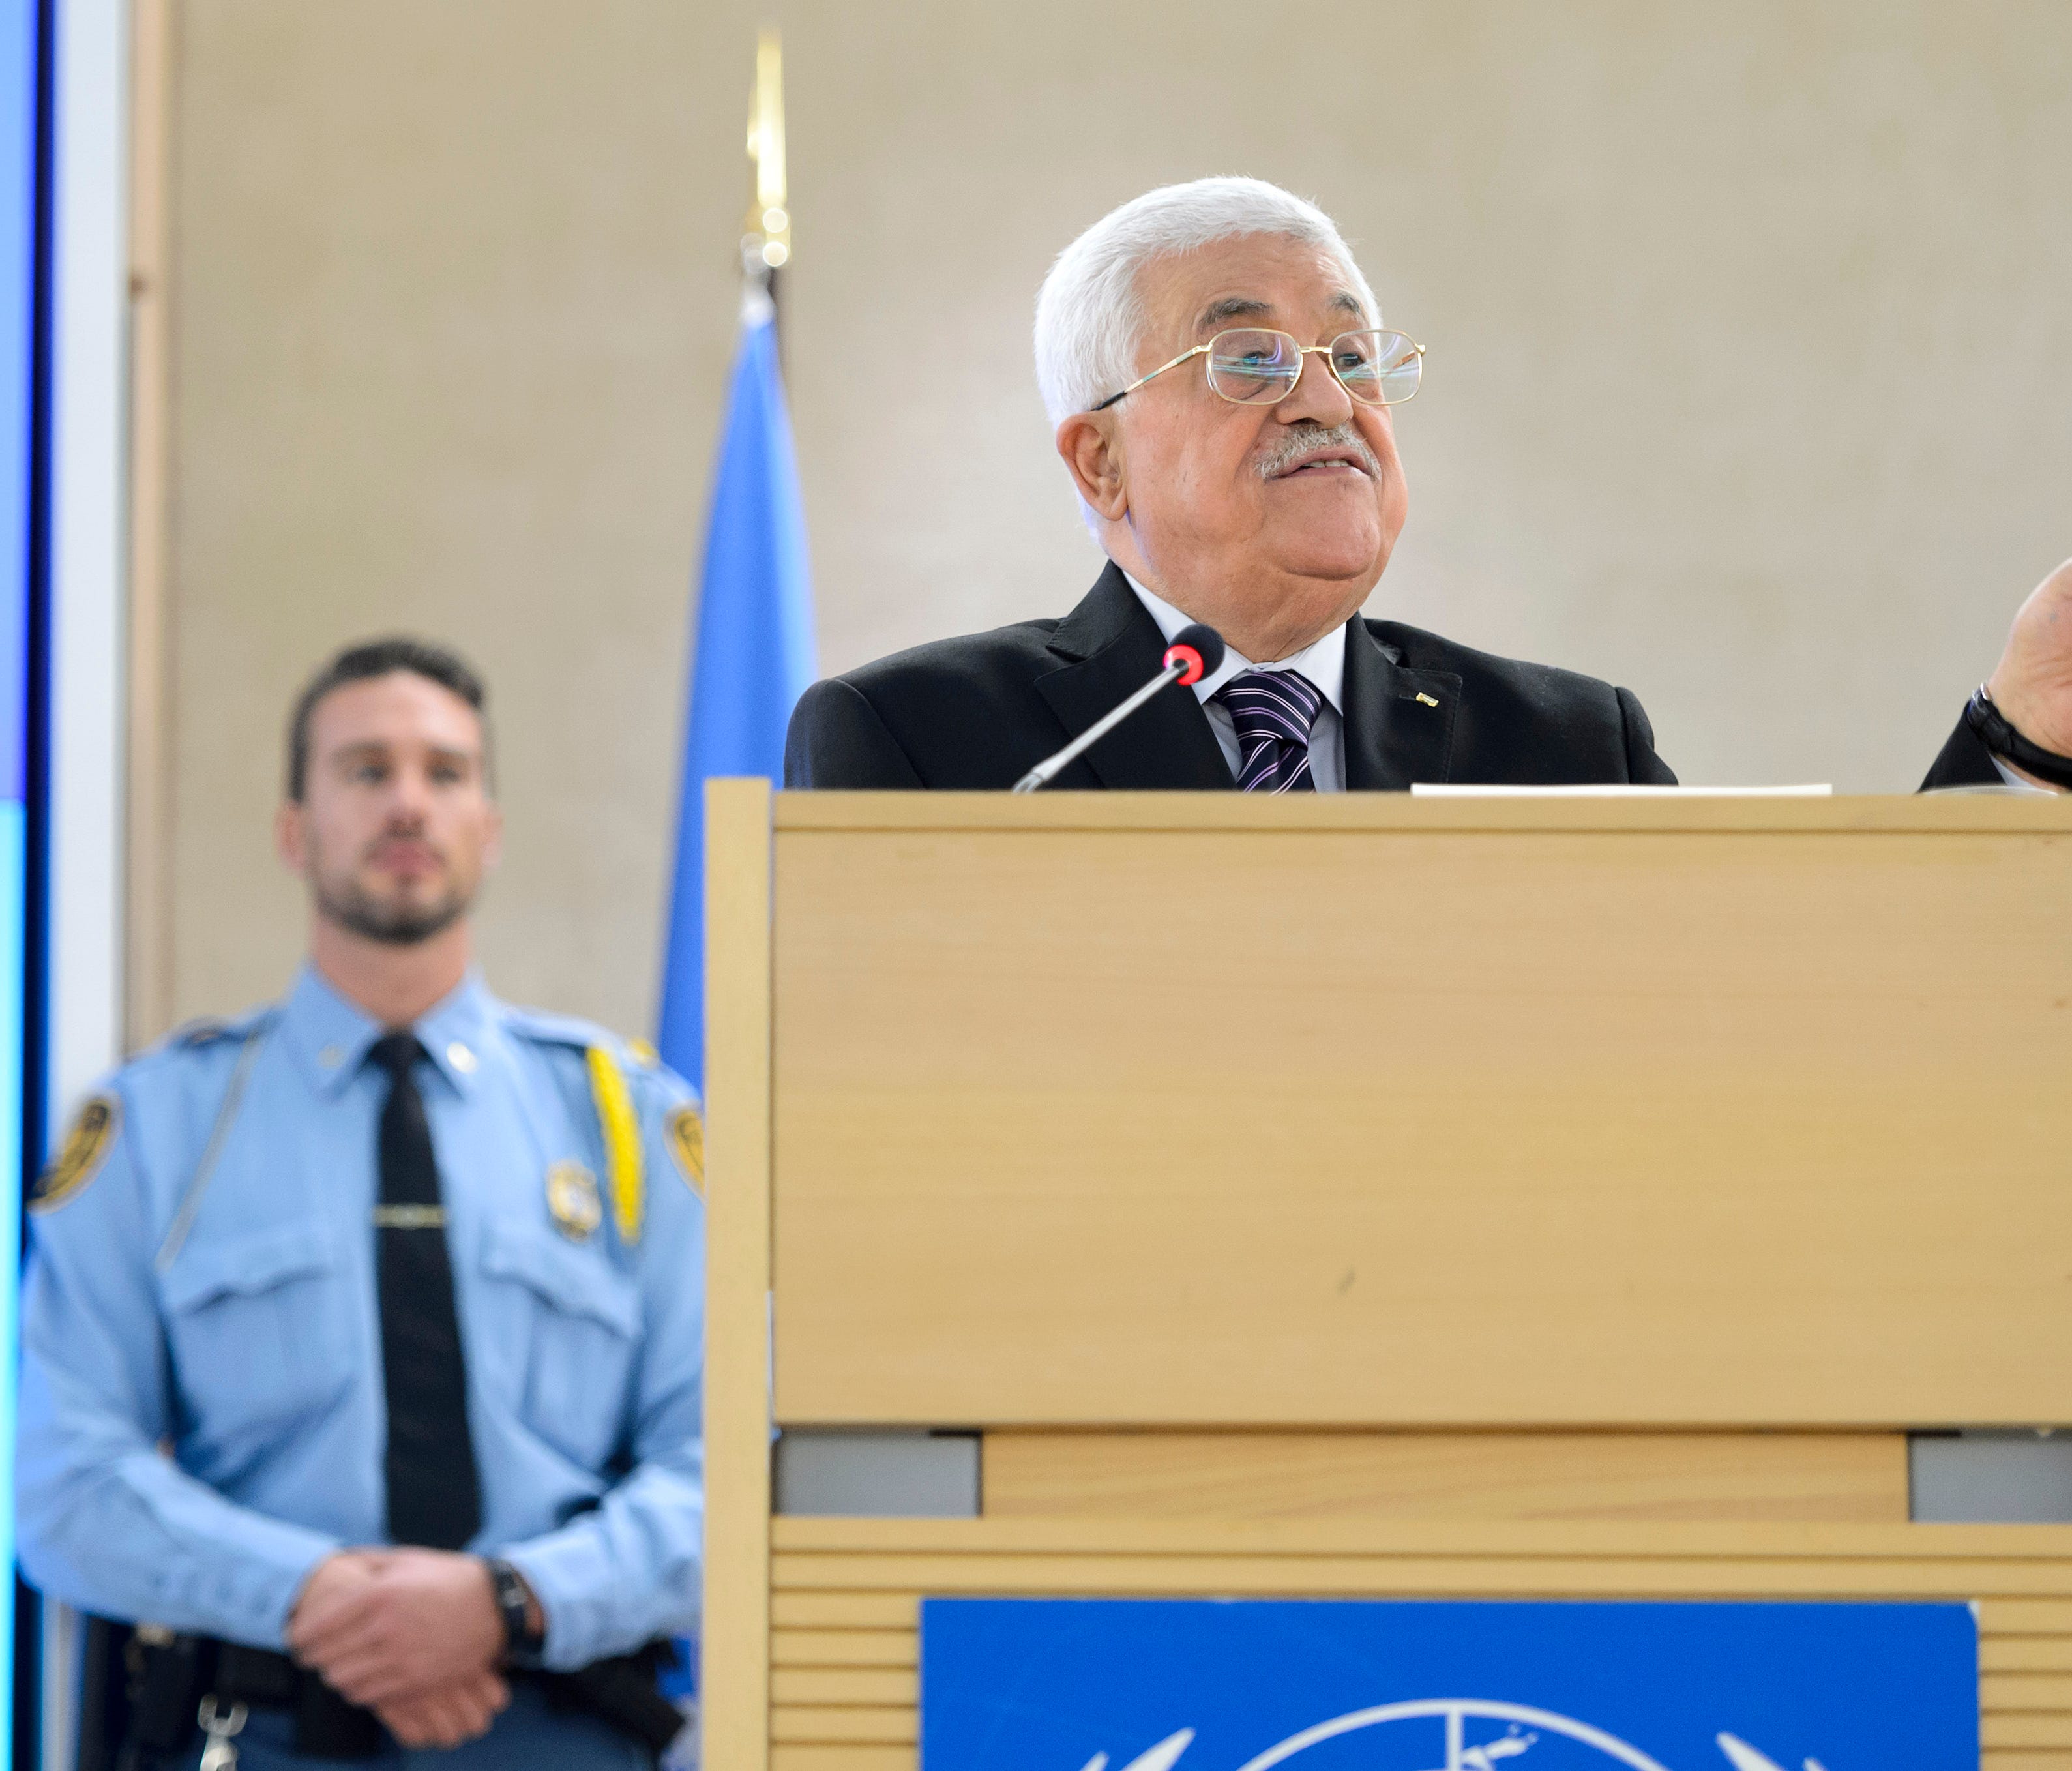 Palestinian President Mahmoud Abbas addresses the UN Human Rights Council during a meeting at the European headquarters of the United Nations, in Geneva, Switzerland on Wednesday Oct. 28, 2015.